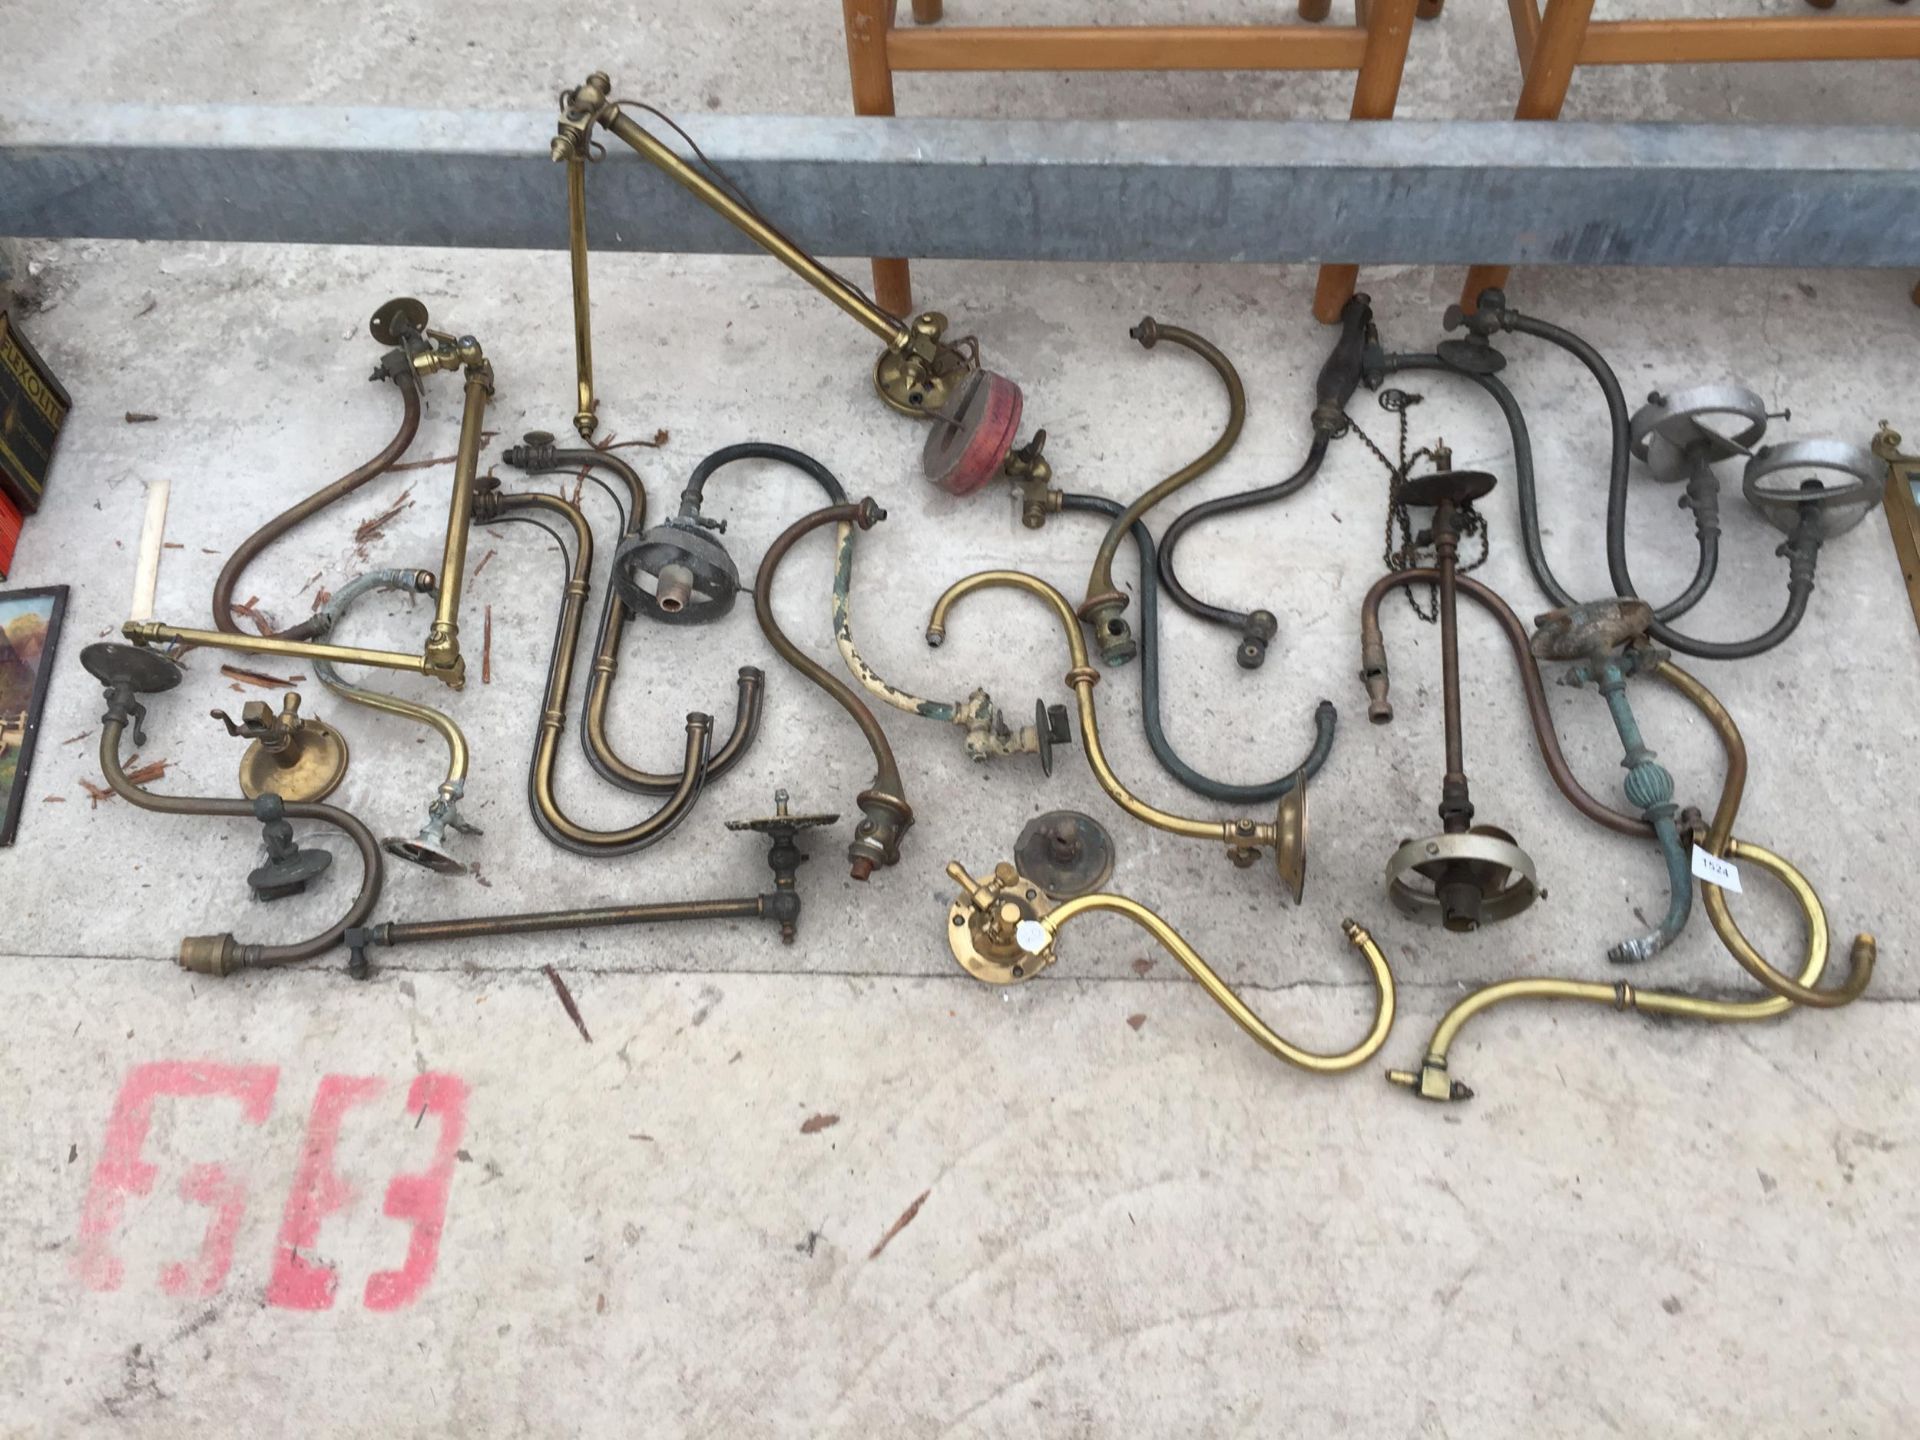 AN ASSORTMENT OF VINTAGE LIGHT FITTINGS